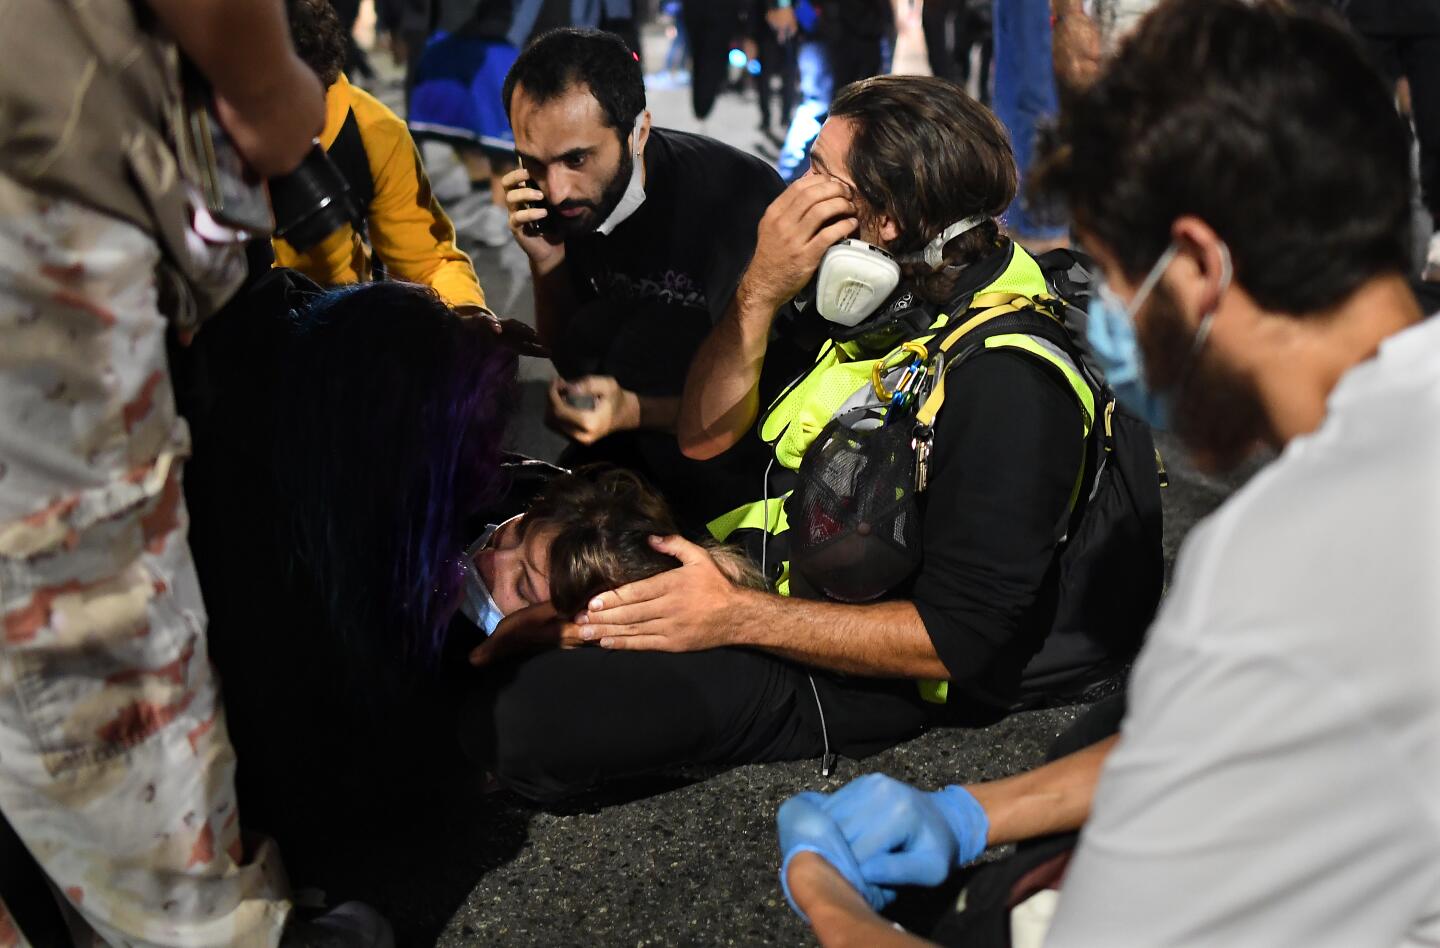 Paramedics help protester who was hit by vehicle